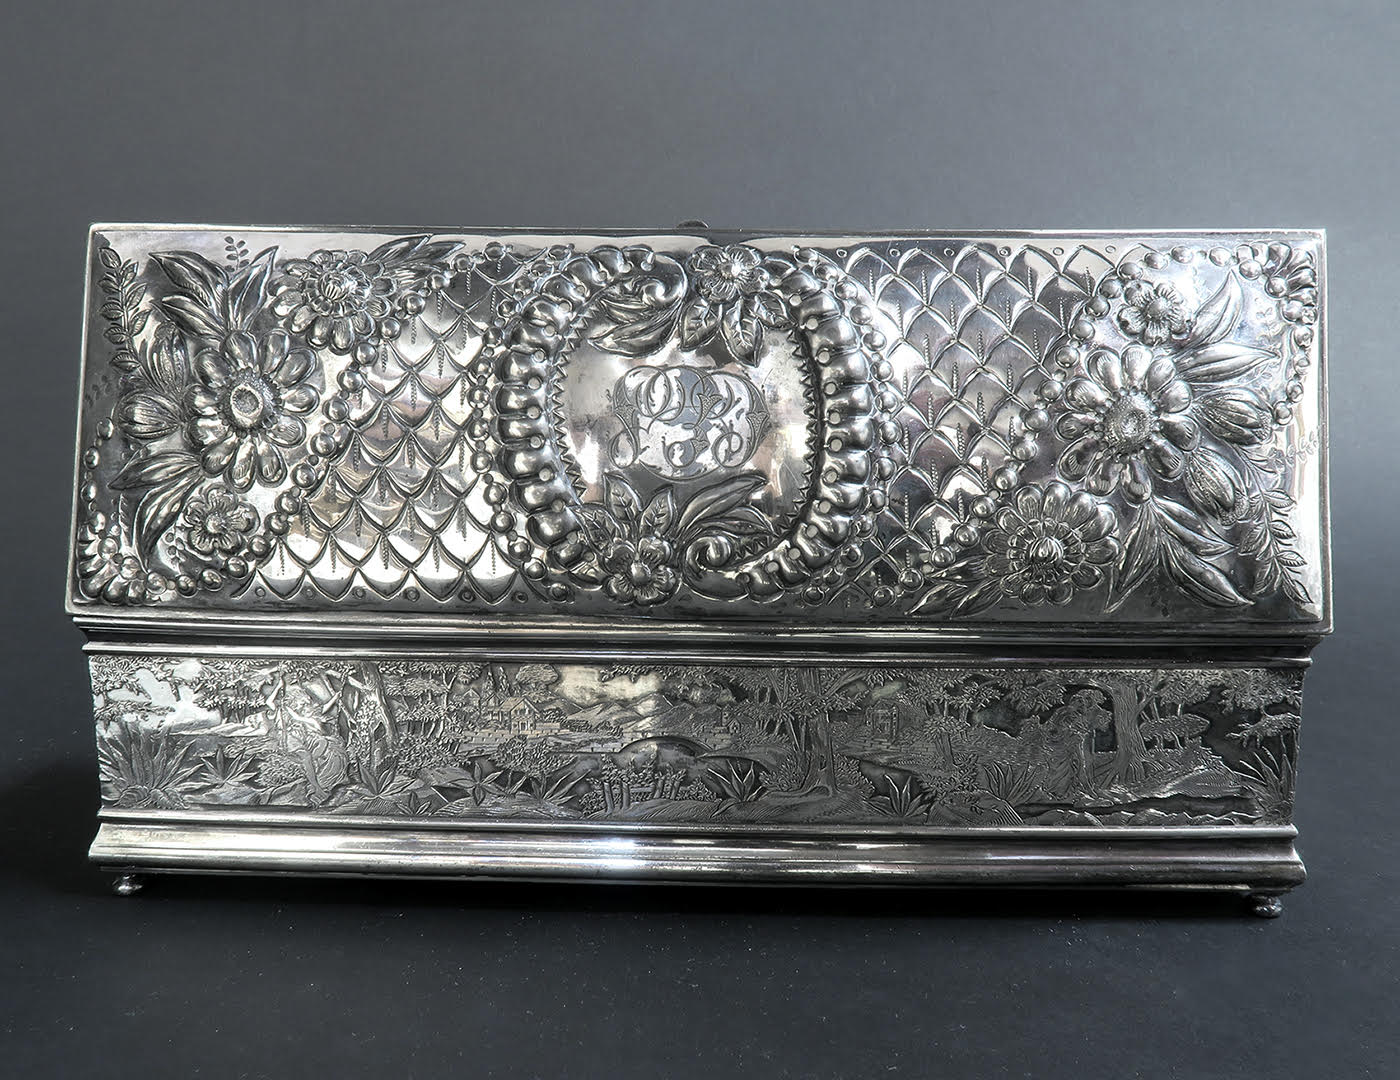 Fine 19th C. Silver-Plated Jewelry Box - Image 9 of 14